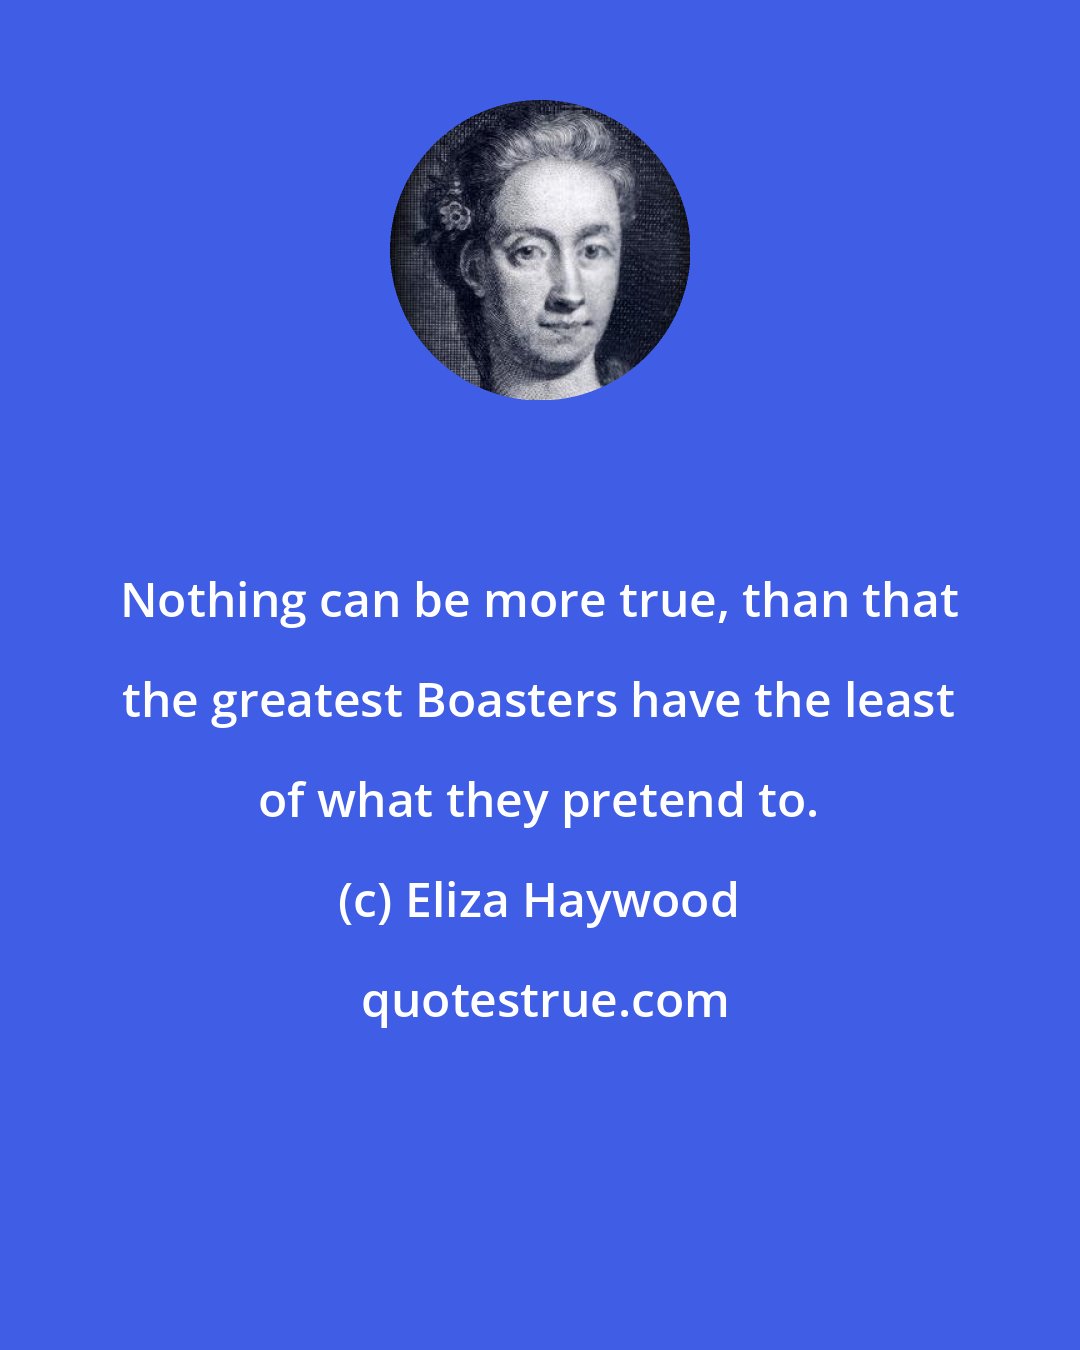 Eliza Haywood: Nothing can be more true, than that the greatest Boasters have the least of what they pretend to.